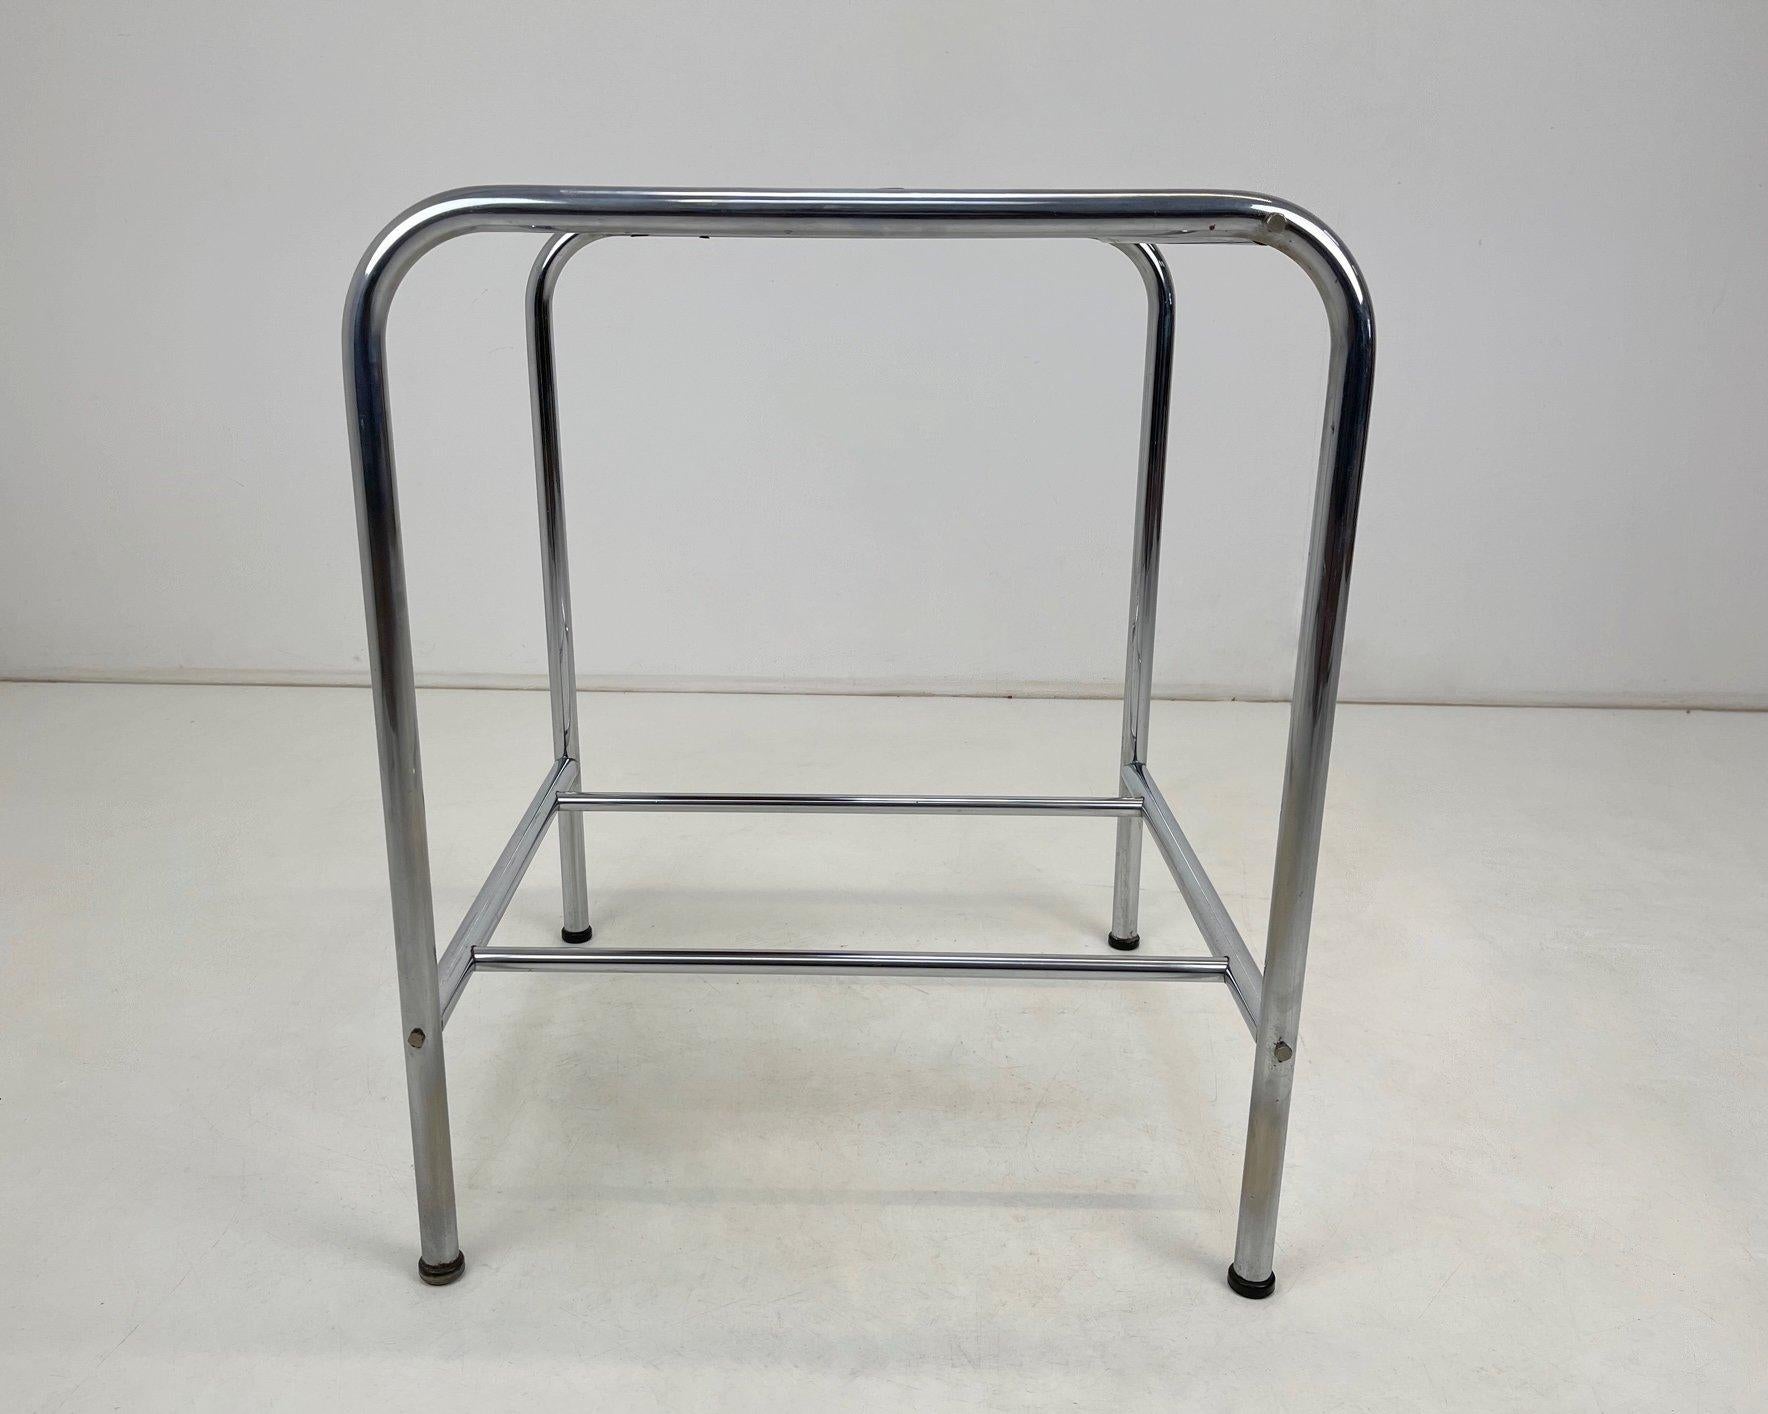 Functionalist Chrome & Wood Table, 1950's For Sale 3